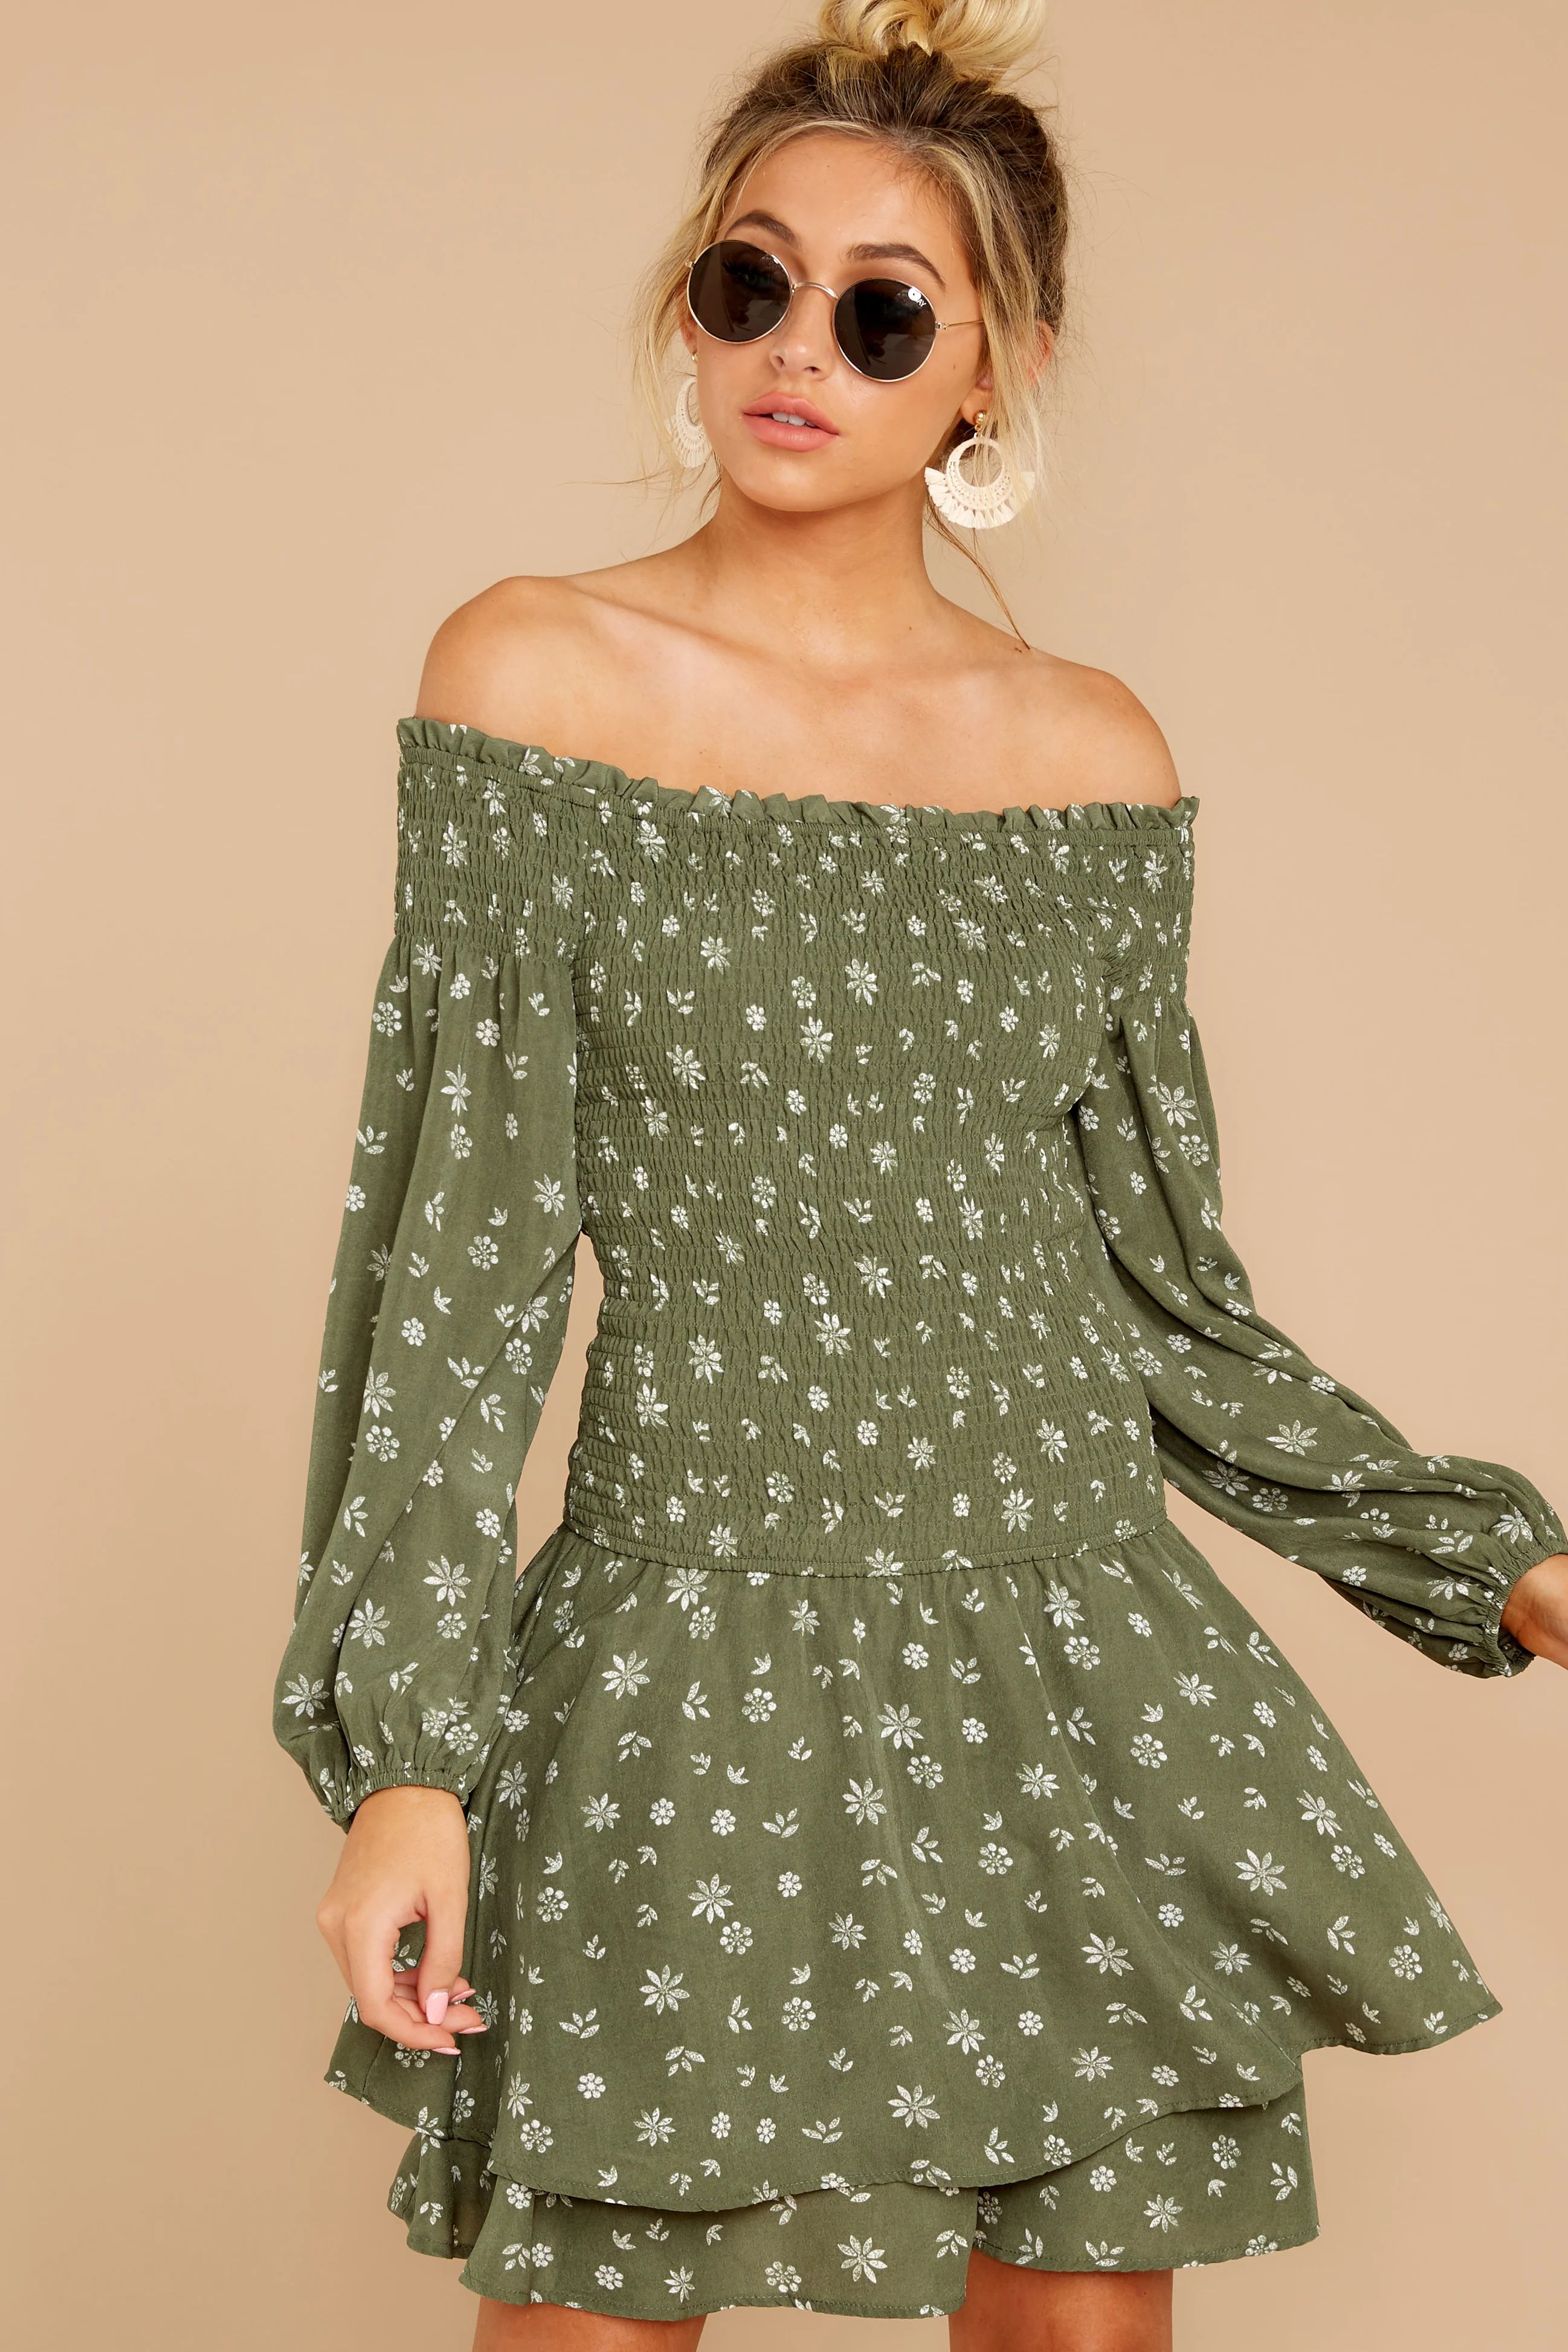 For The Twirl Of It Olive Green Print Dress | Red Dress 